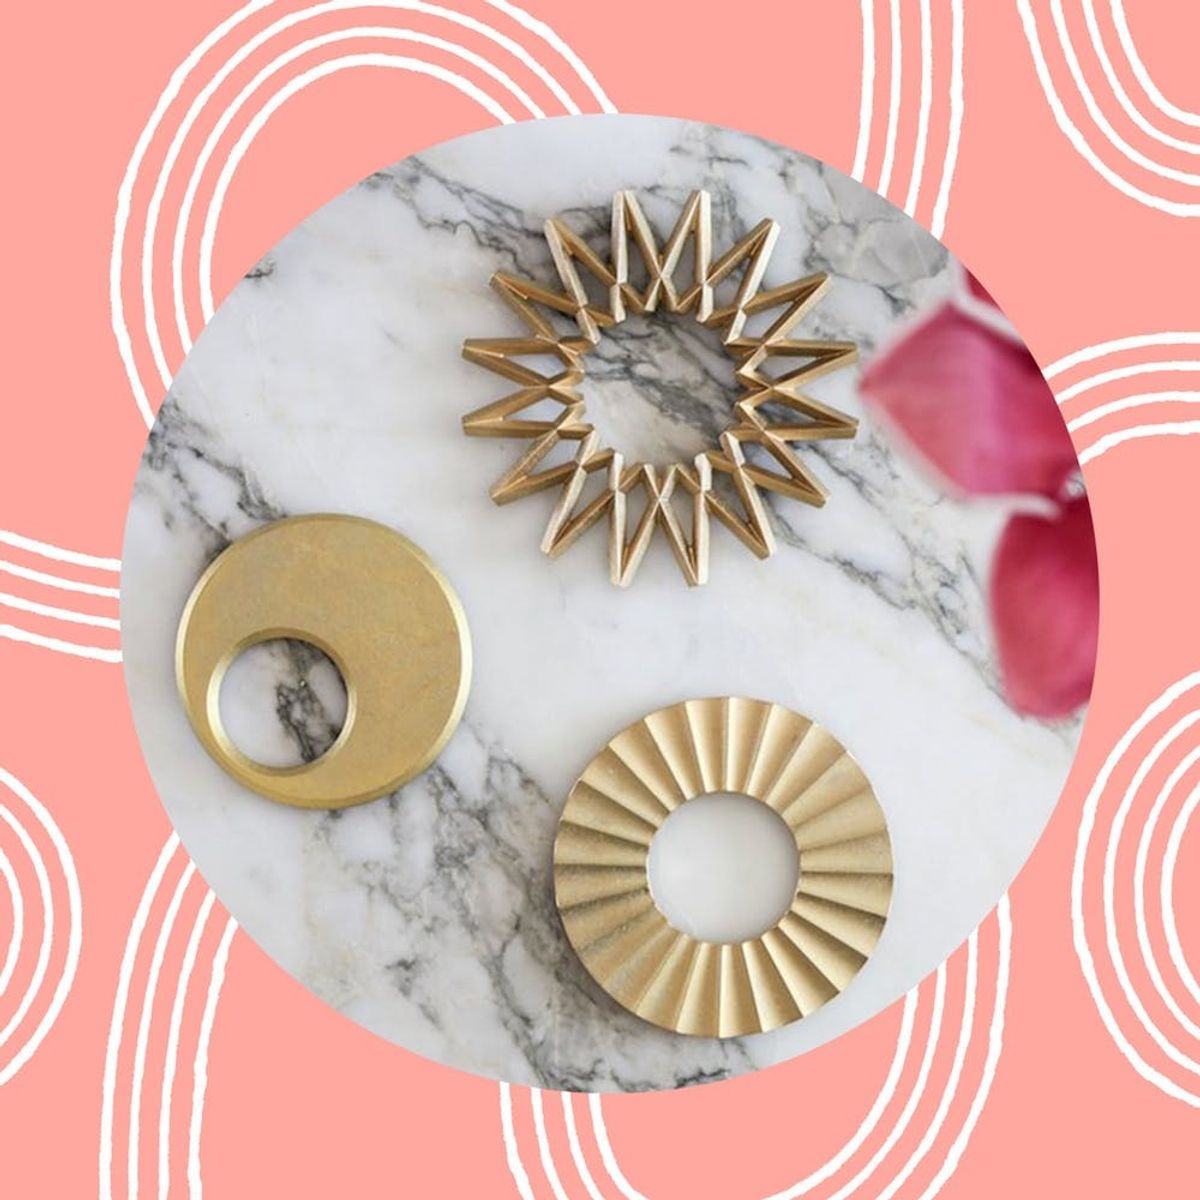 20 Thoughtful Birthday Gifts for the Cancer Zodiac